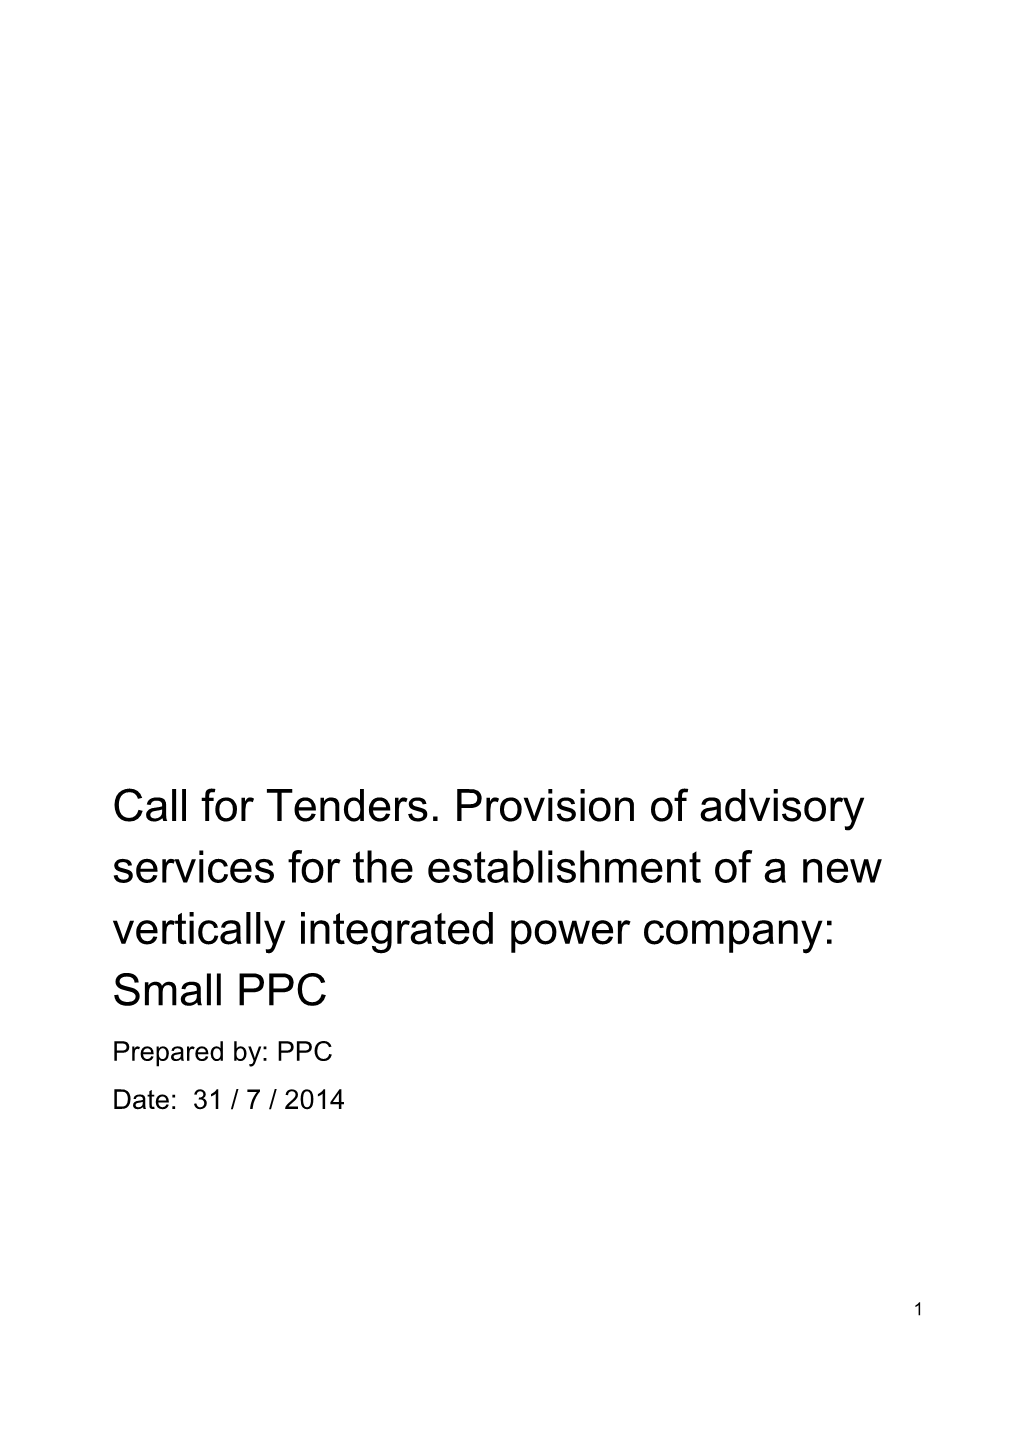 Call for Tenders. Provision of Advisory Services for the Establishment of a New Vertically Integrated Power Company: Small PPC Prepared By: PPC Date: 31 / 7 / 2014